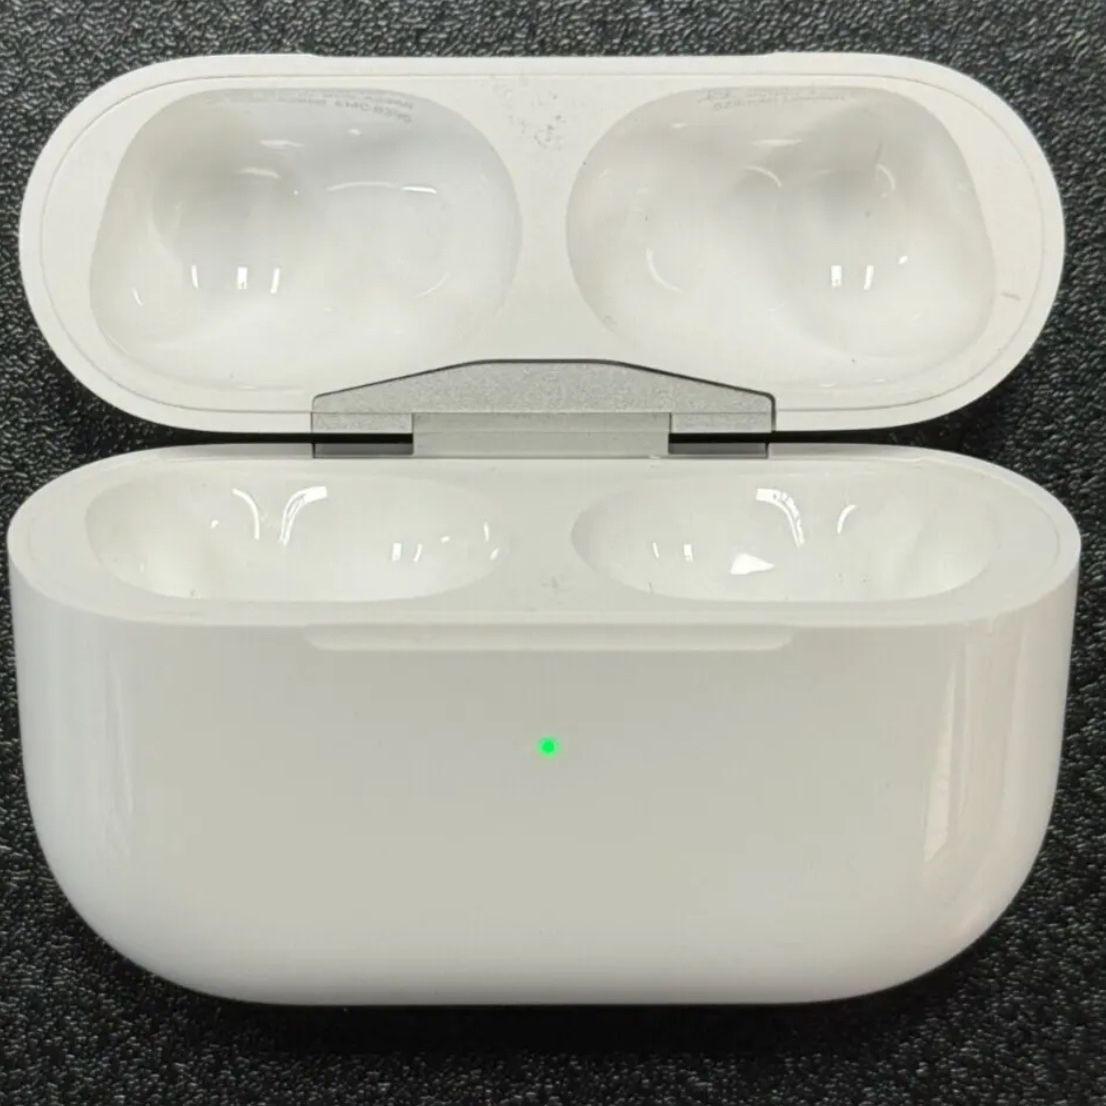 AirPods Pro 2nd Generation USB-C Charging Case 